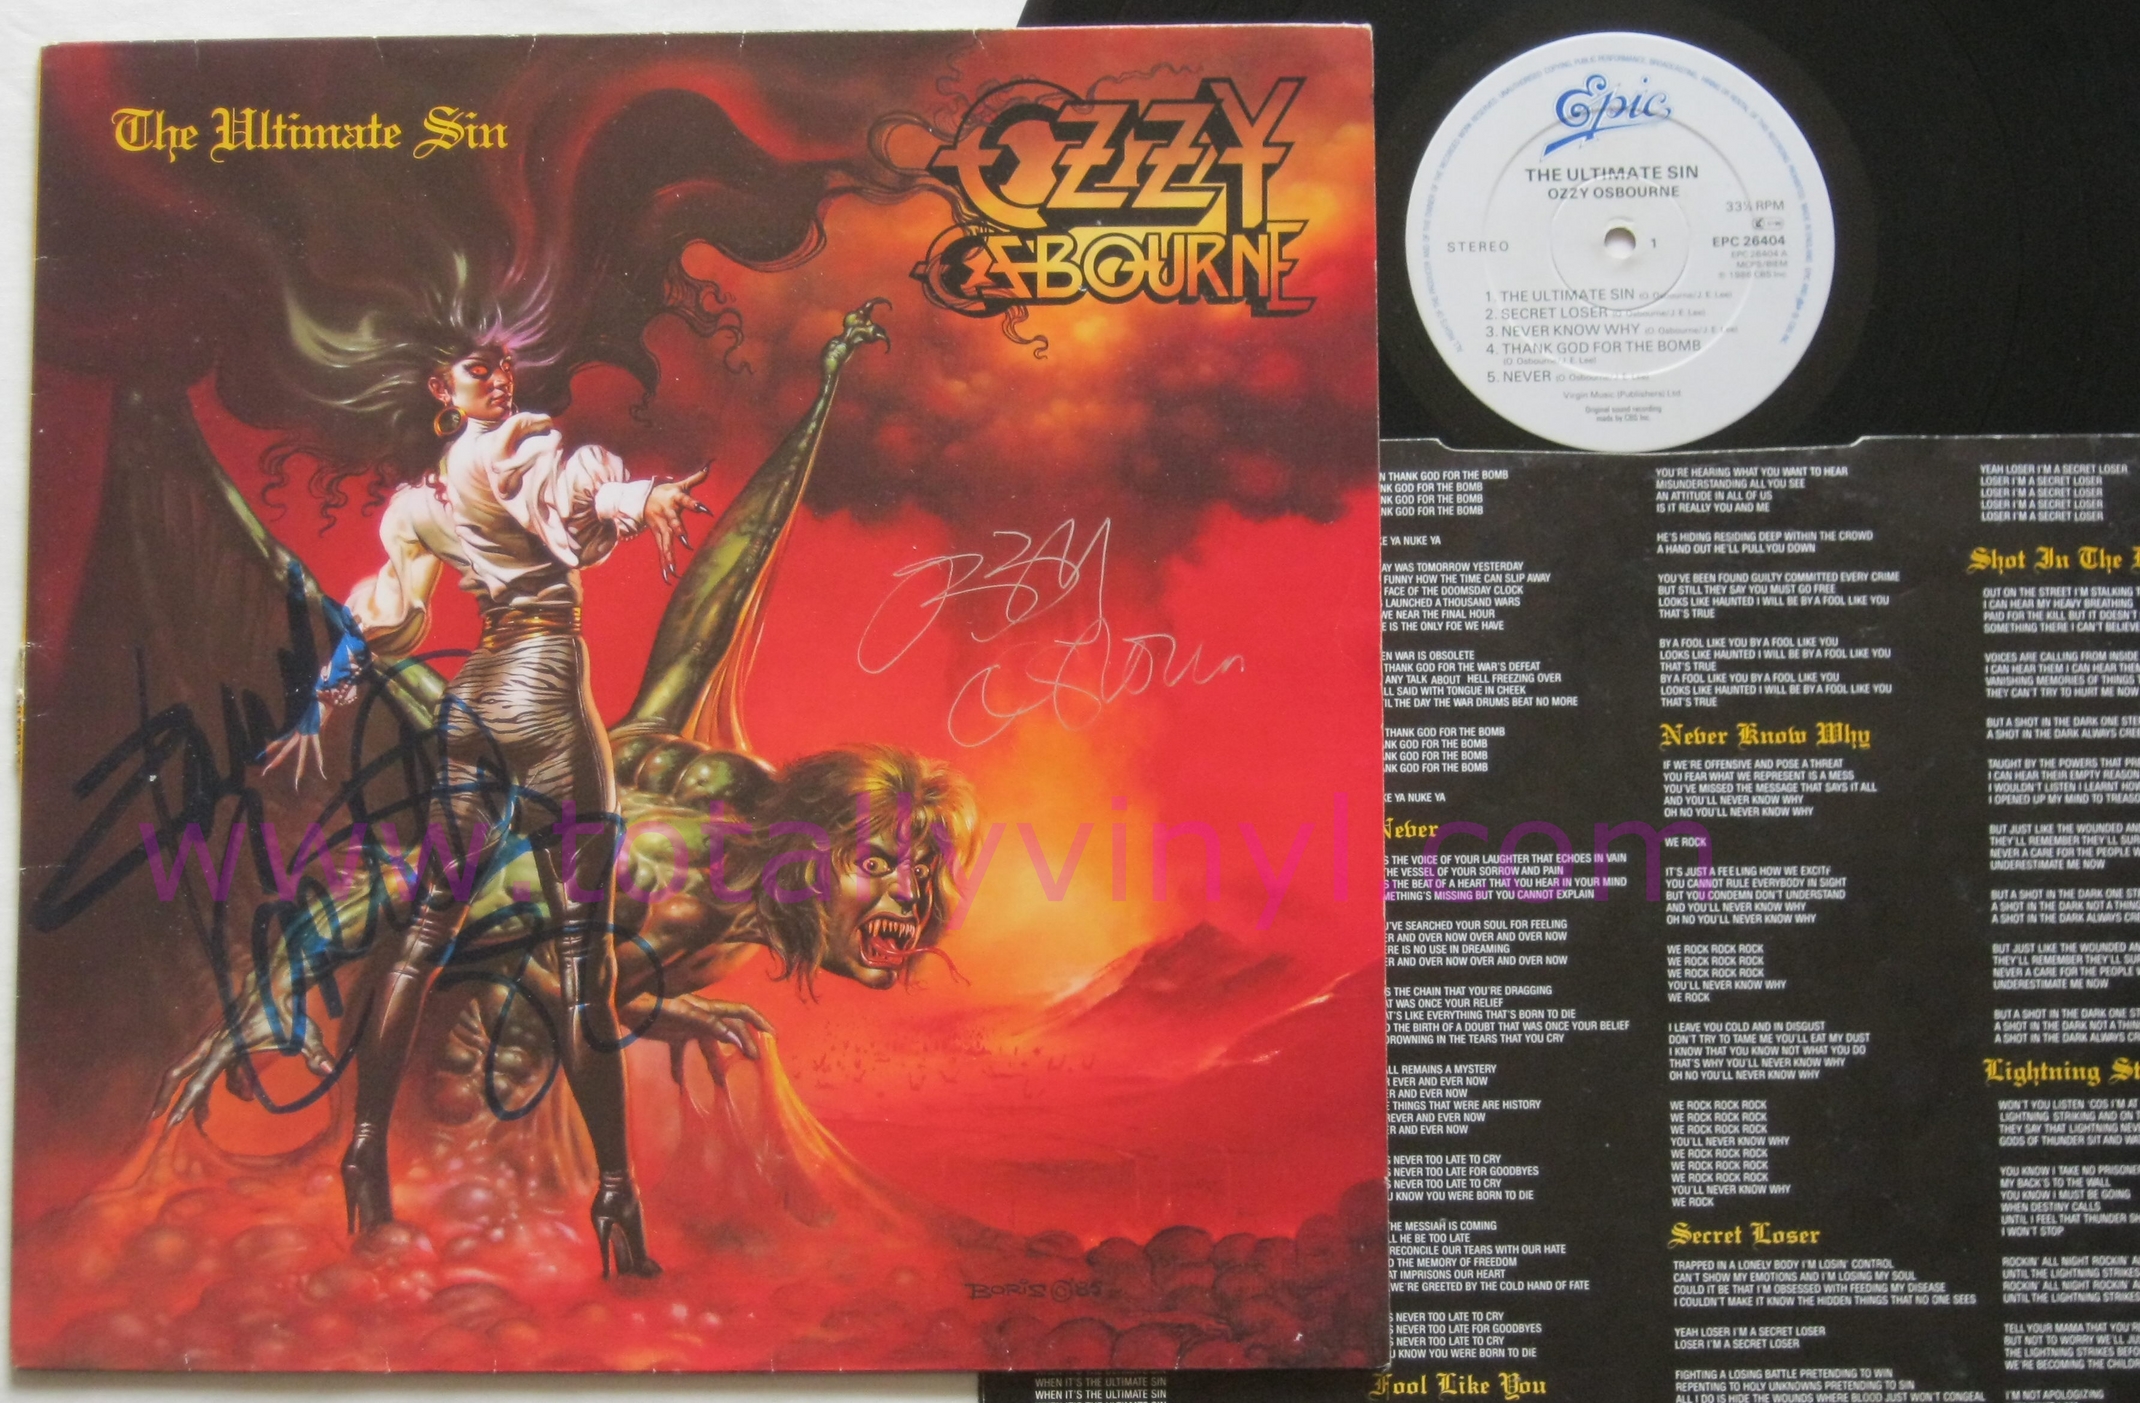 Totally Vinyl Records || Osbourne, Ozzy - The Ultimate Sin Autographed LP Vinyl